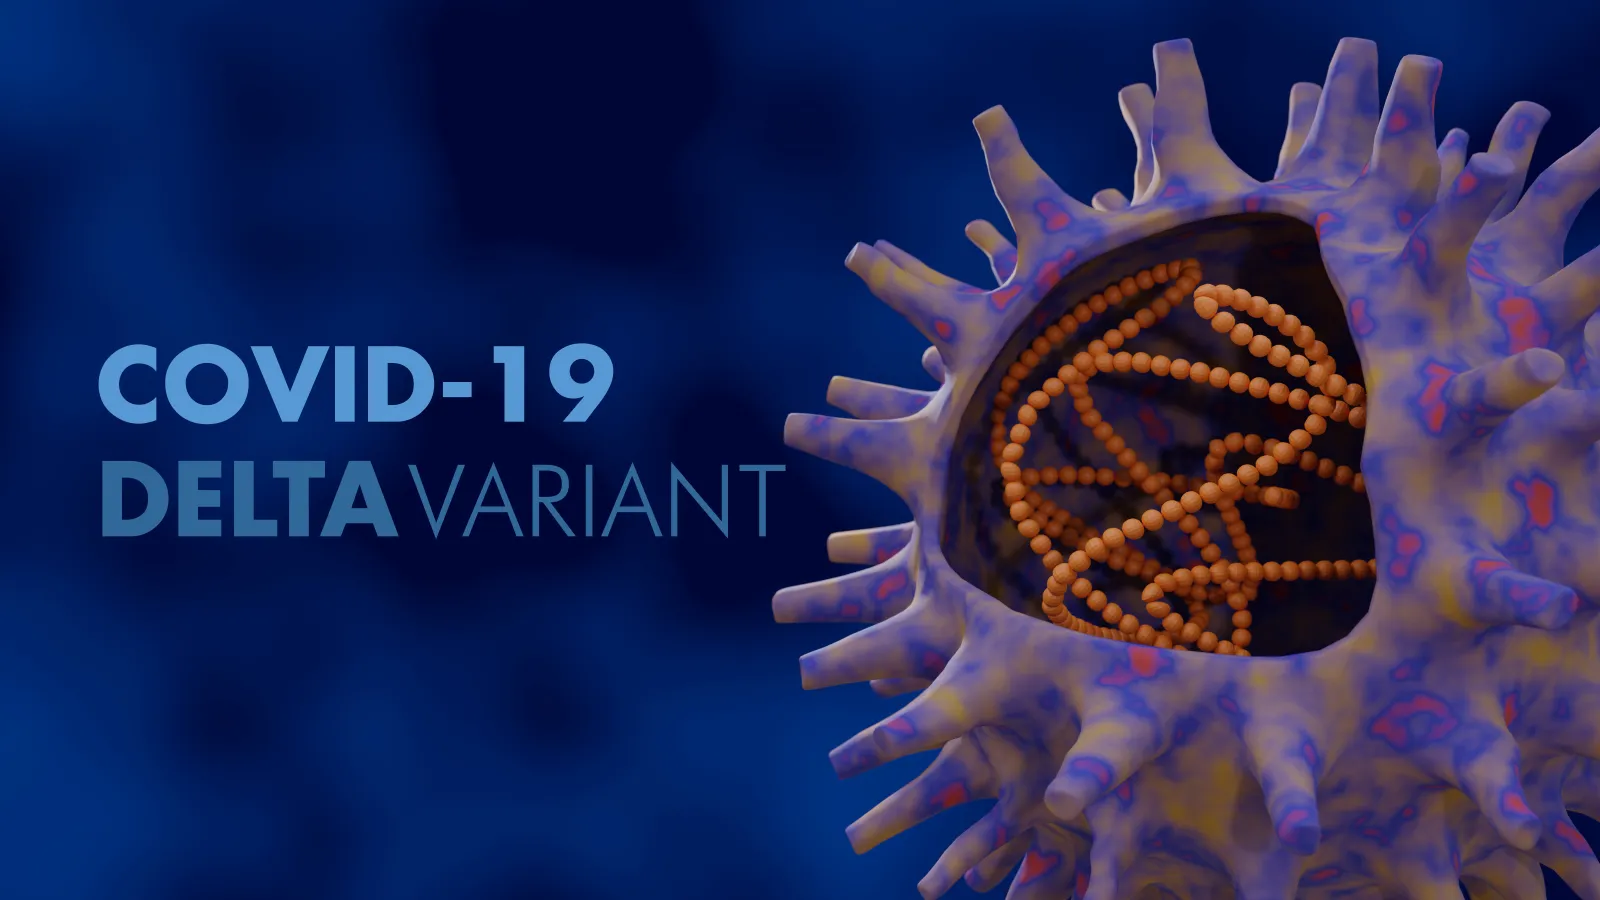 3d rendering of a COVID-19 microbe on a blue background labeled 'the delta variant'